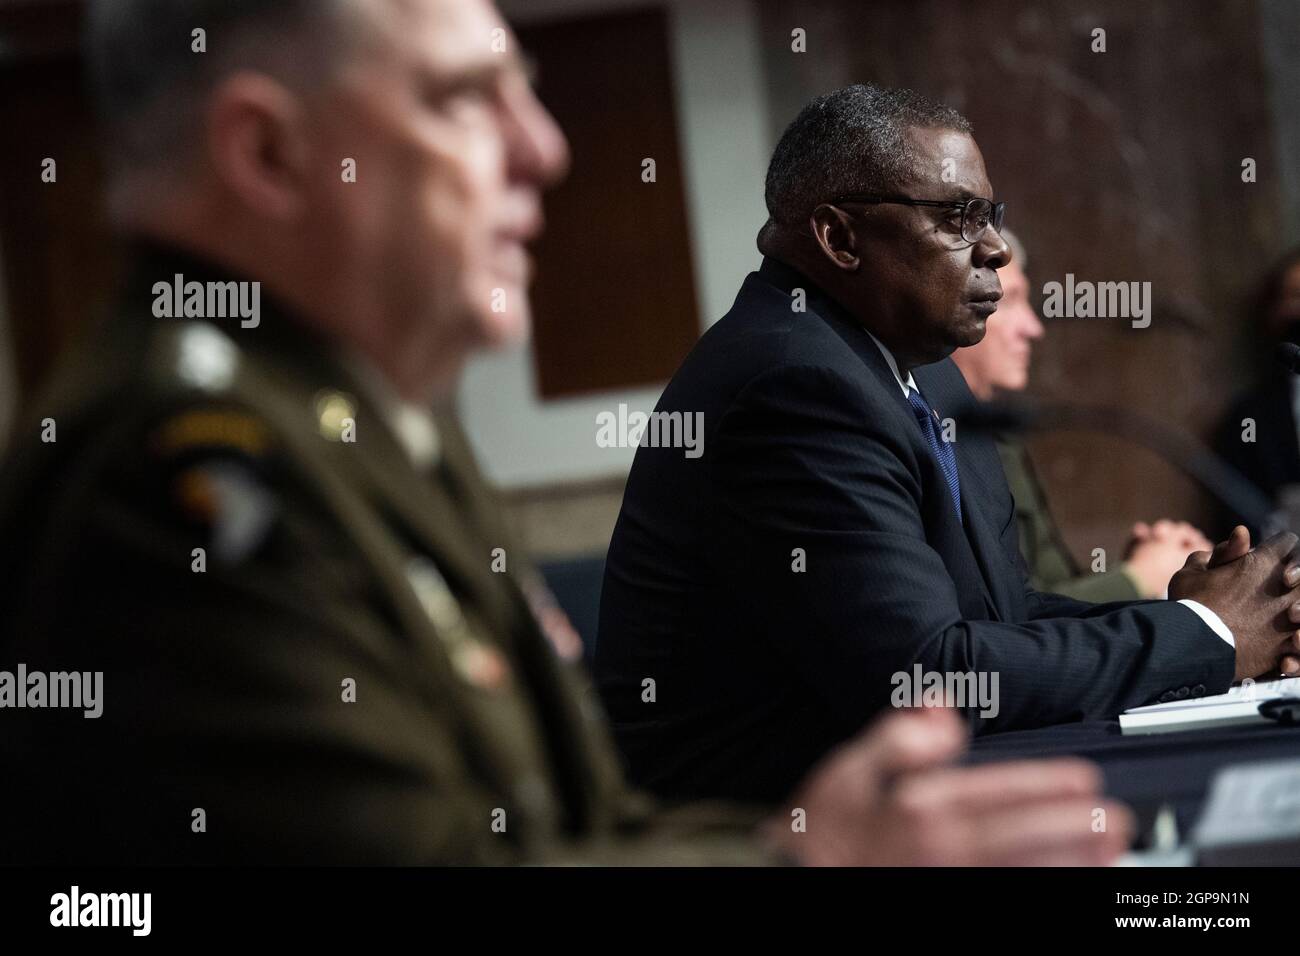 Chairman of the Joint Chiefs, Secretary of Defense testify before Senate  Armed Services Committee 